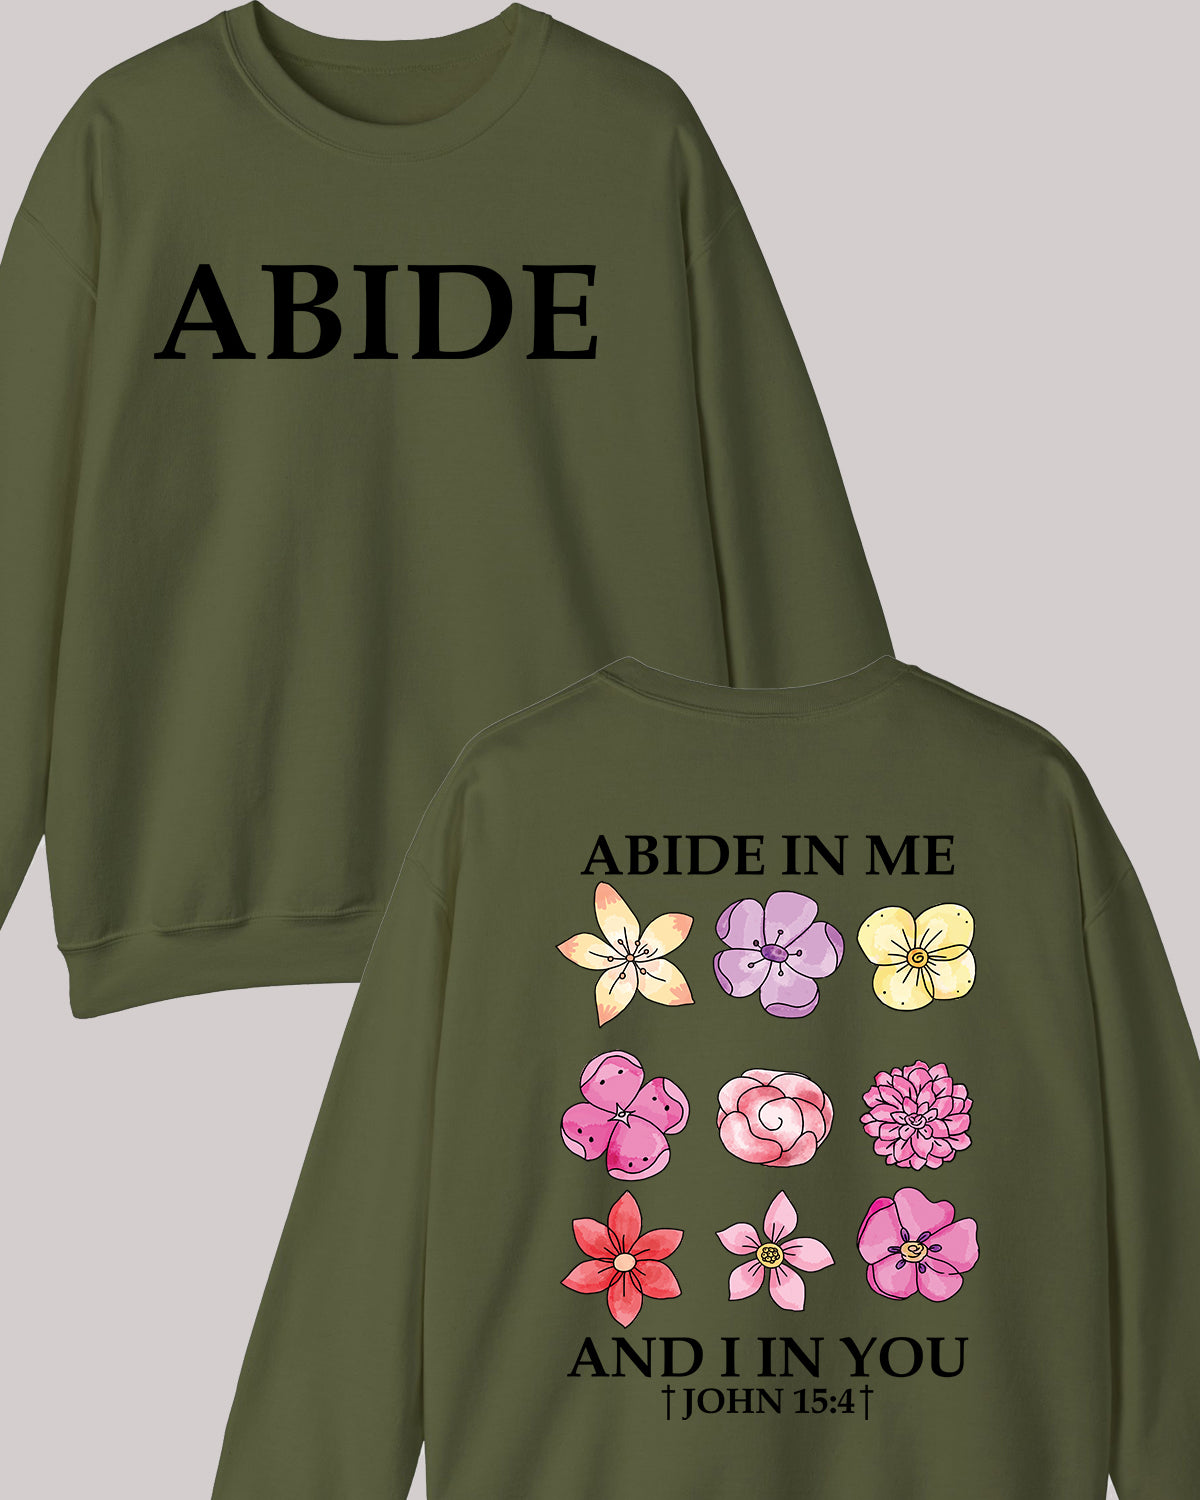 Abide in Me Faith Based Front and Back print Bible Verse Sweatshirt